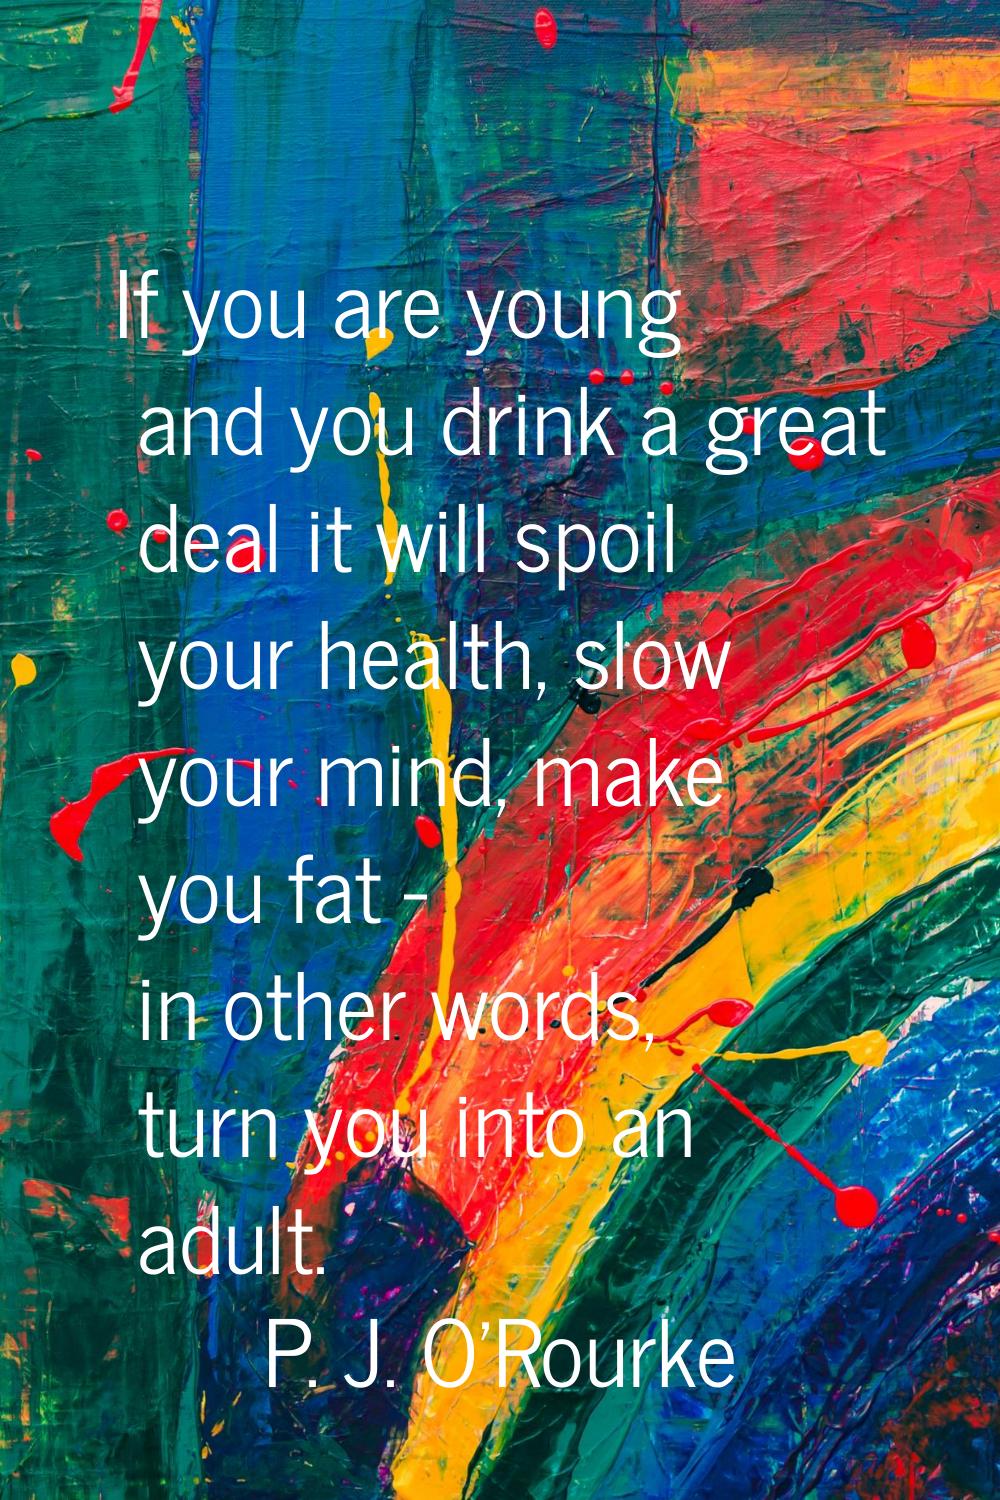 If you are young and you drink a great deal it will spoil your health, slow your mind, make you fat